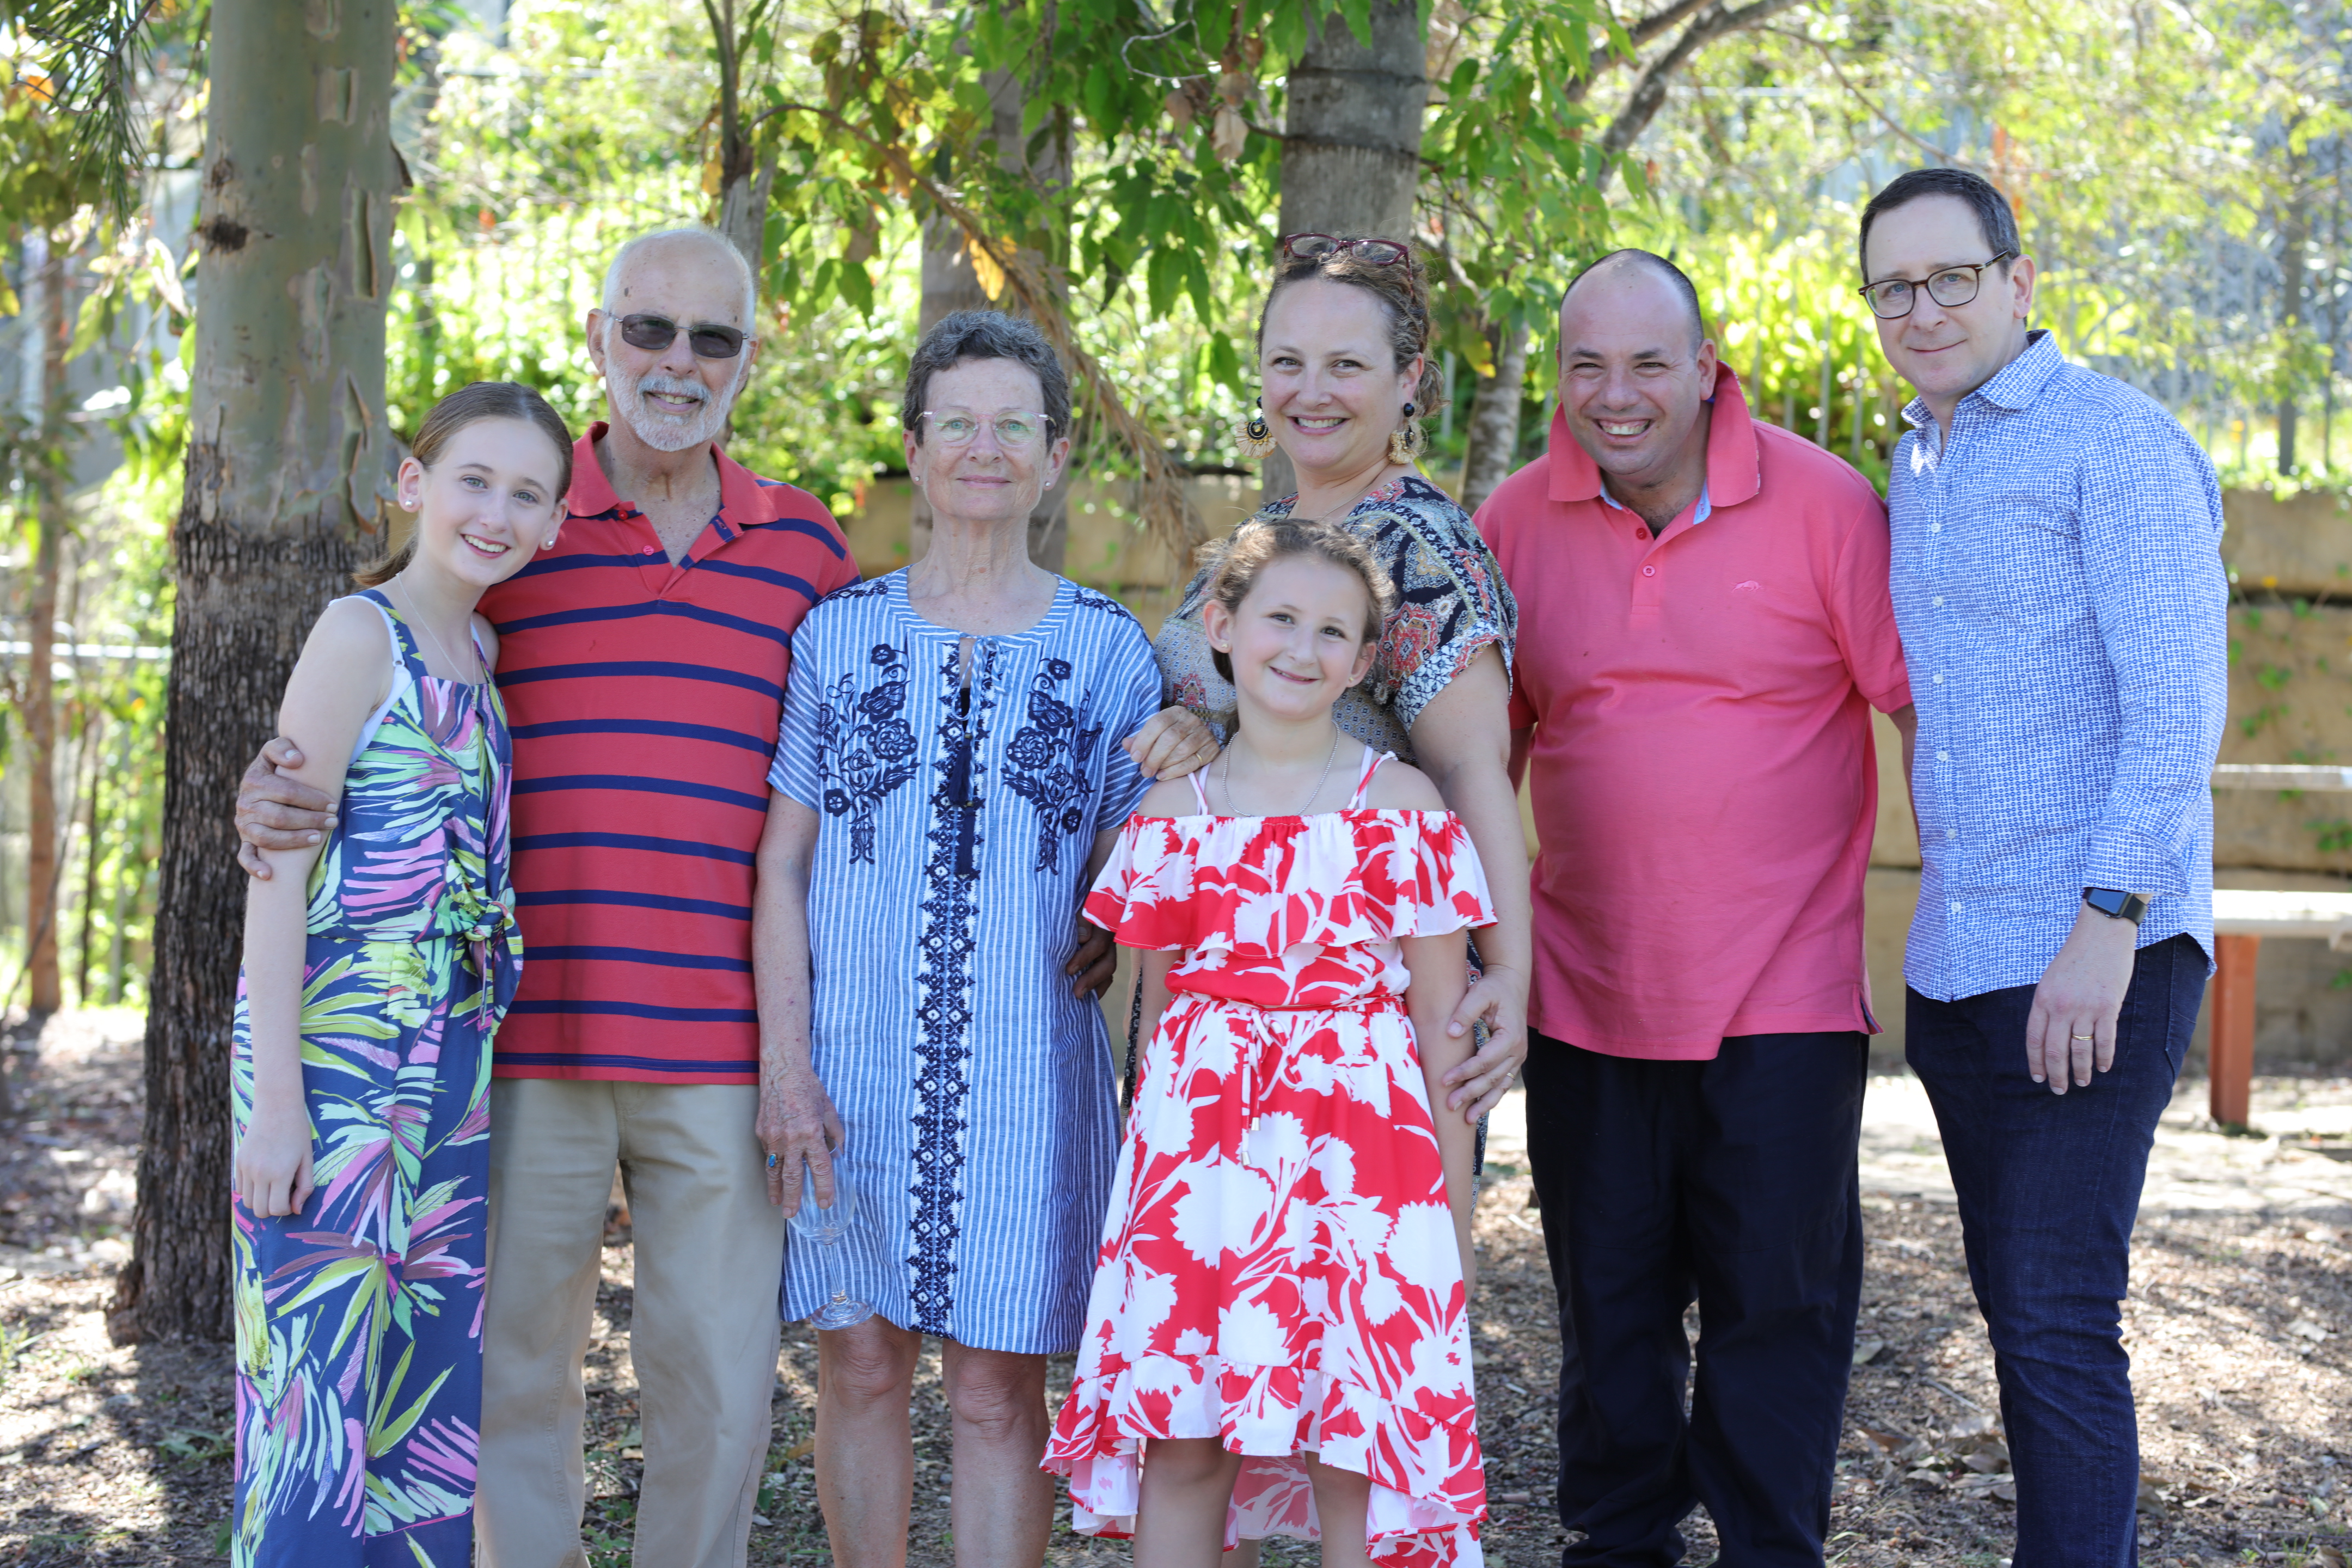 Michael J Solomon (OAM), second from left, pictured with his wife Rosemary, granddaughters Ella (left) and Sophie (right), children Leah and Josh and son-in-law Jason.